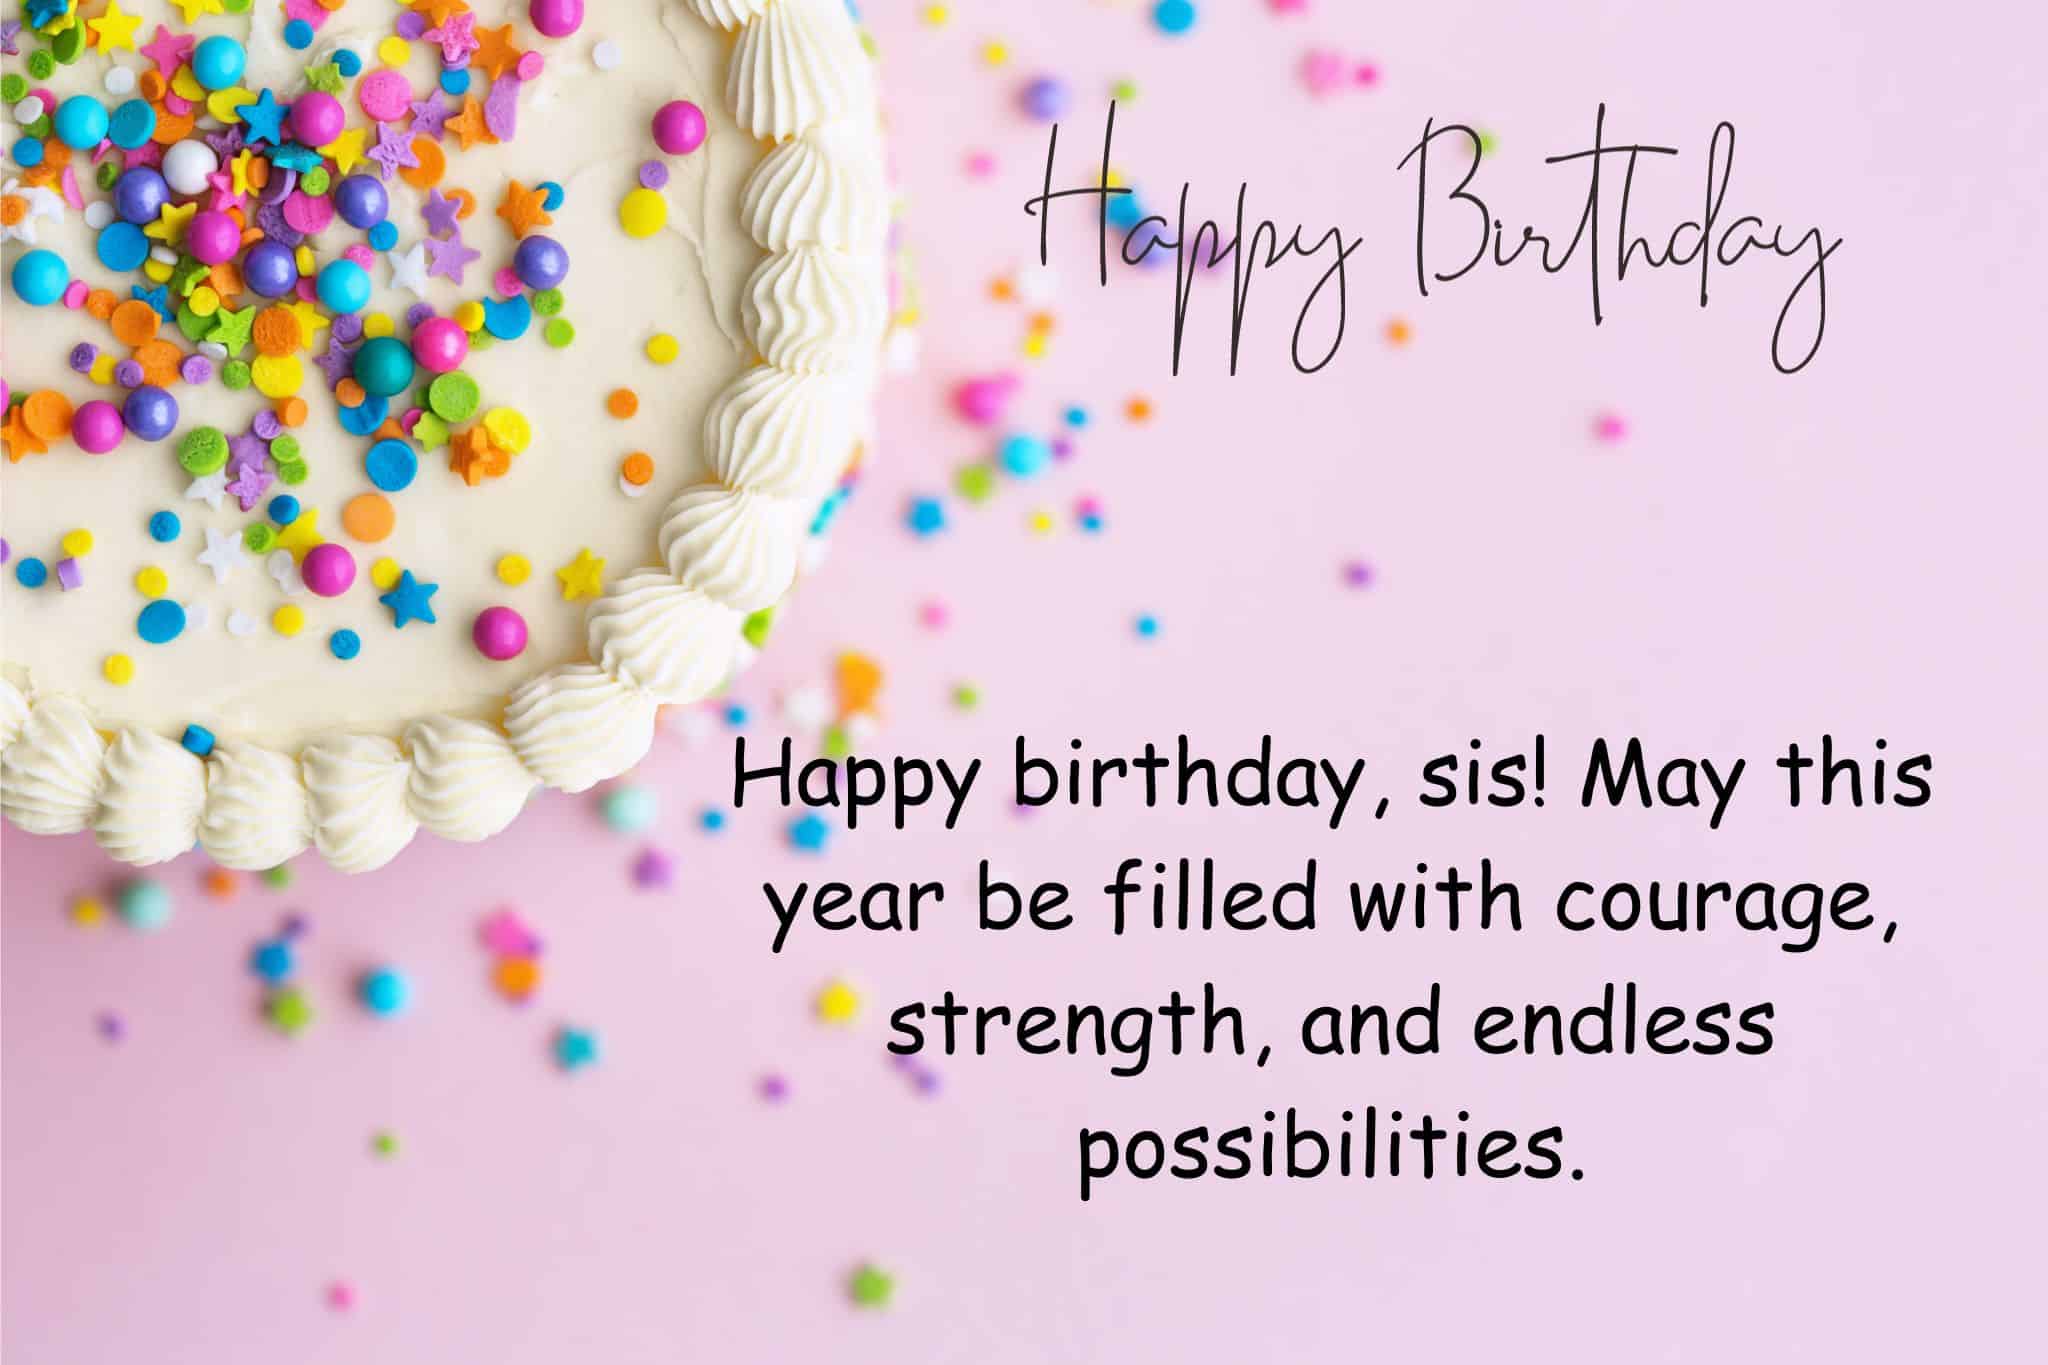 happy birthday, sis! may this year be filled with courage, strength, and endless possibilities.